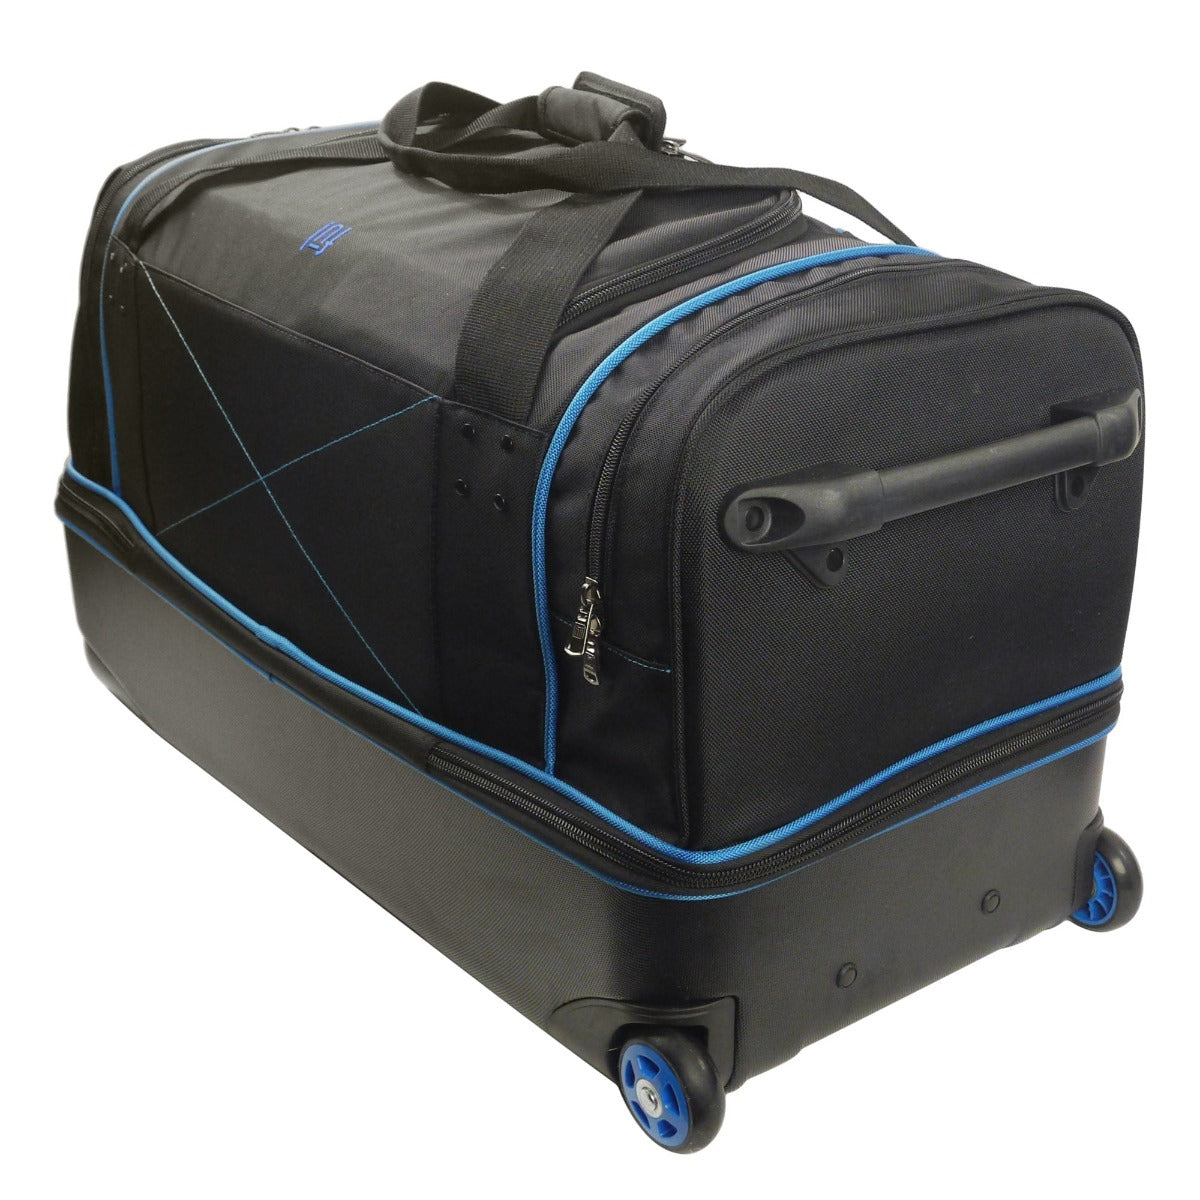 Ful Workhorse 30" split level wheeled rolling duffle bag in black with blue detail